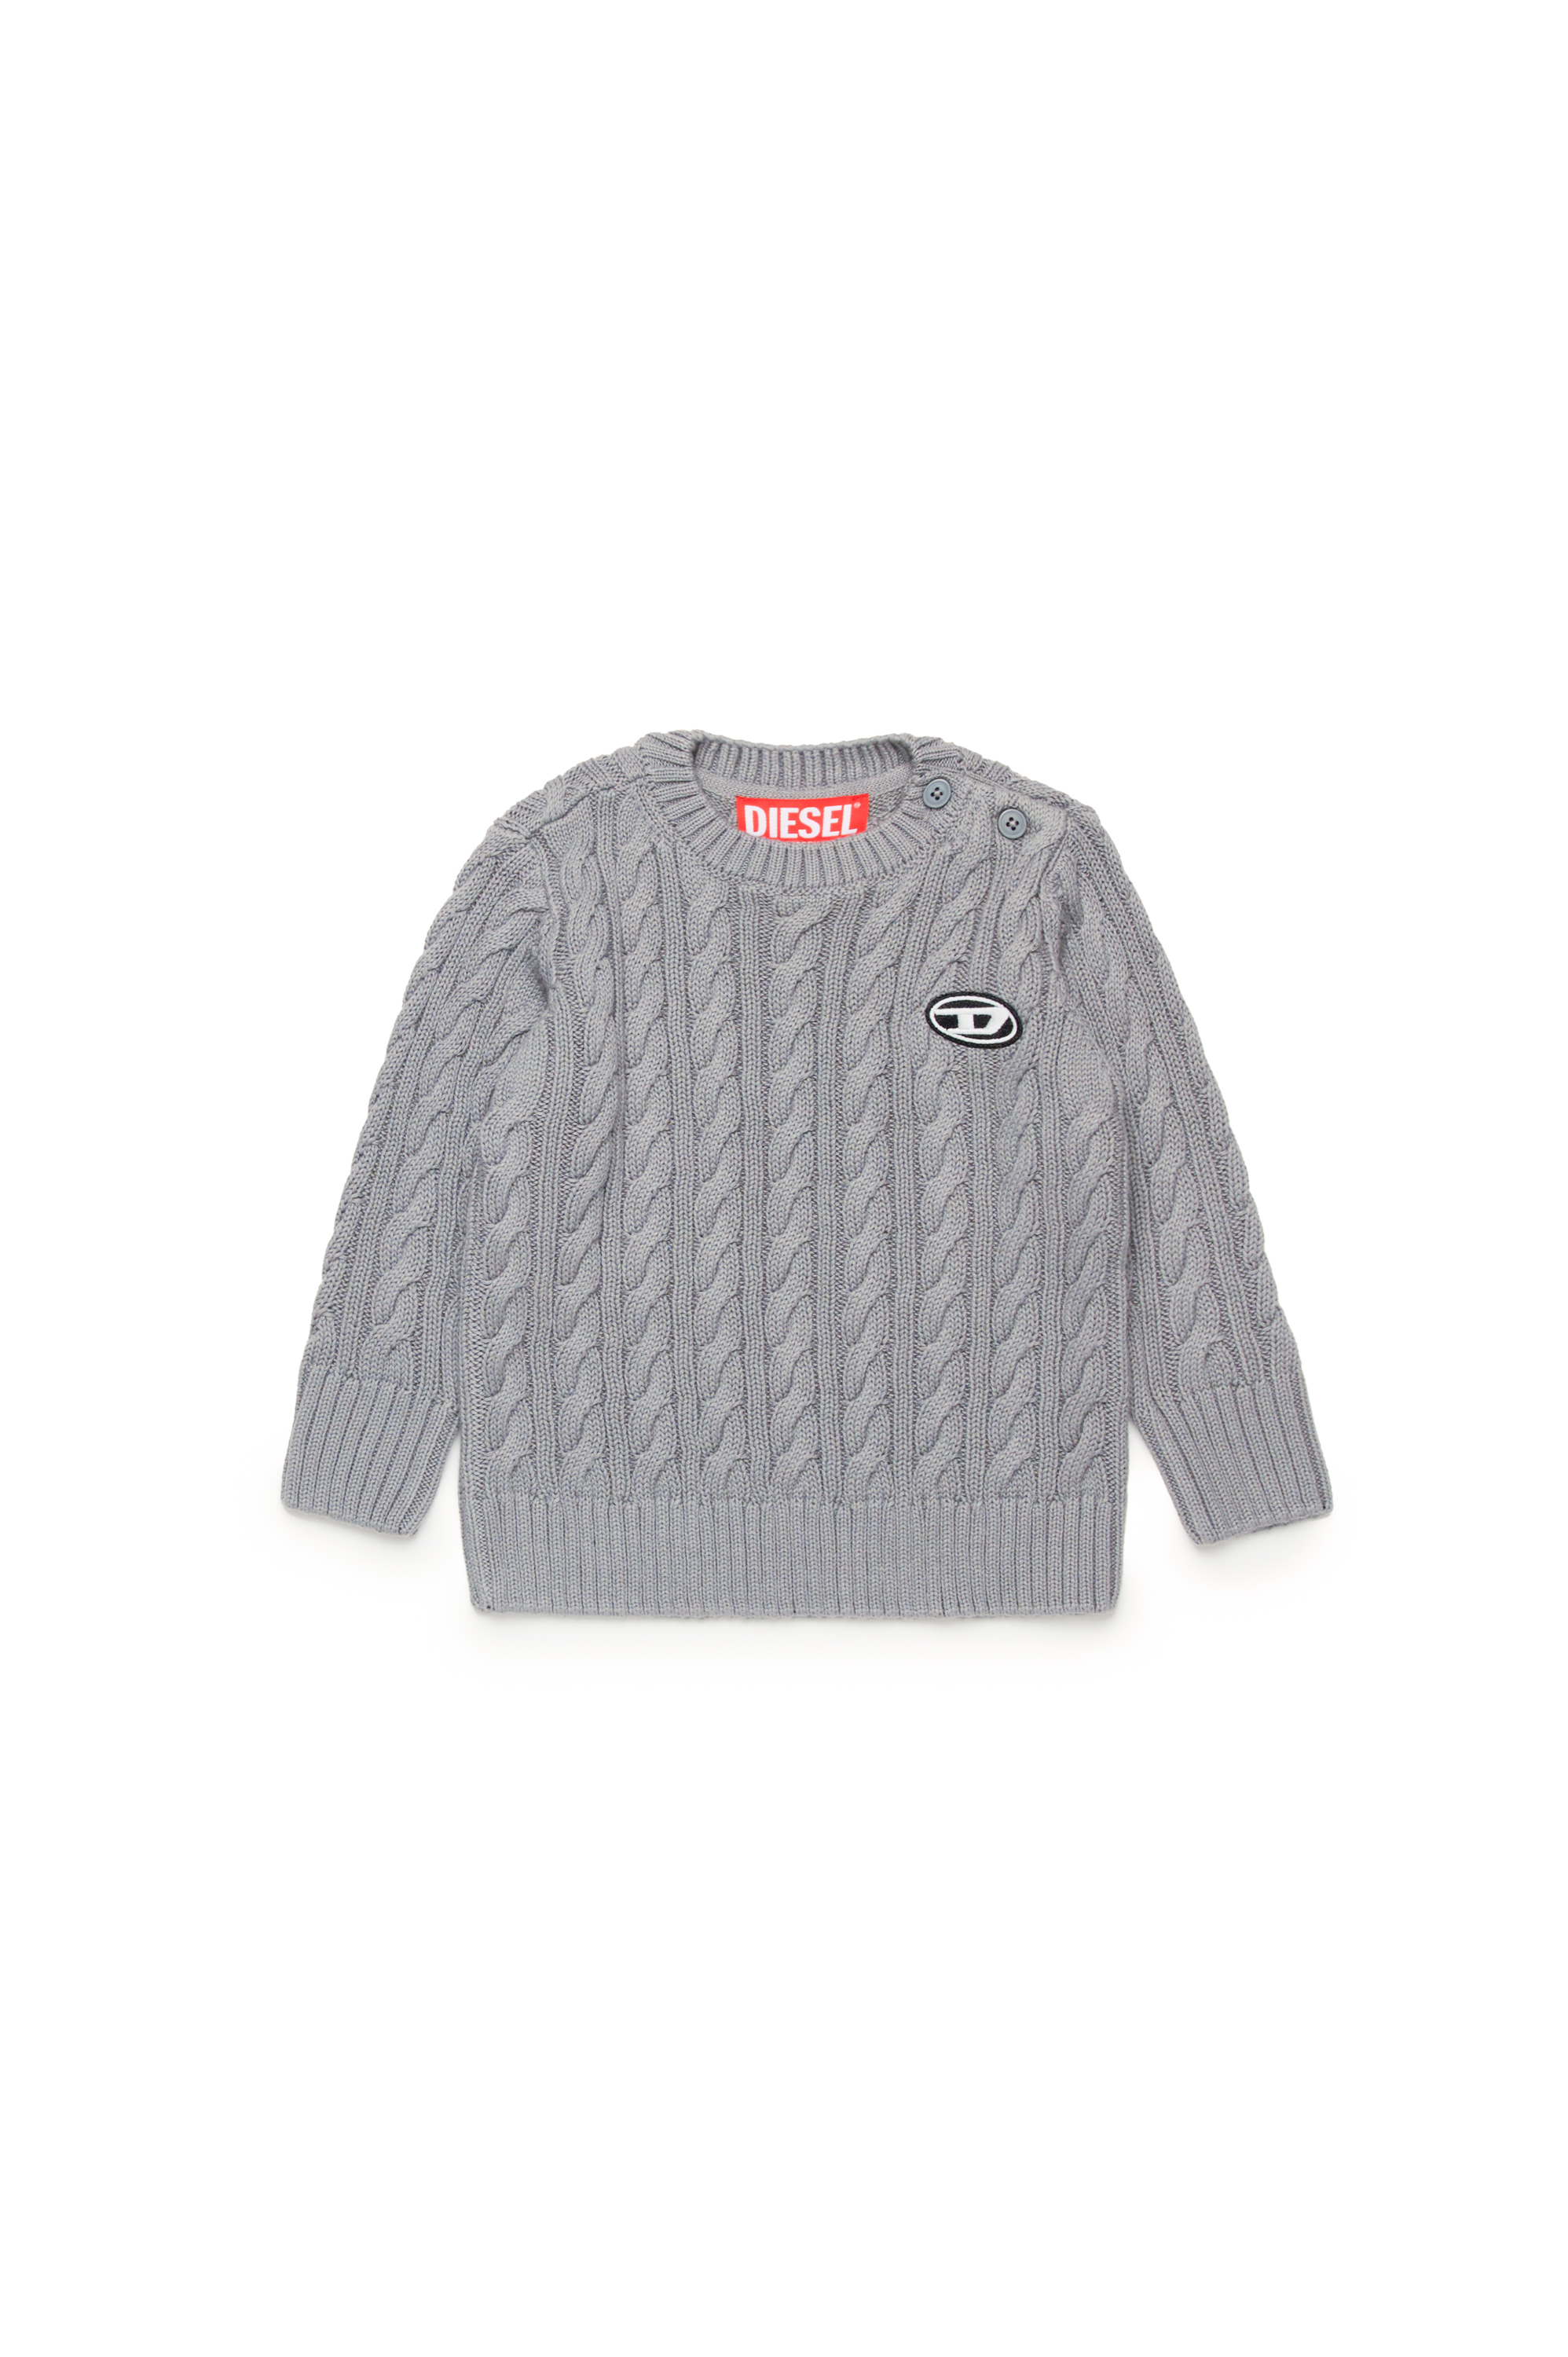 Diesel - KBAMBYB, Unisex Pullover in cotone con patch Oval D in Grigio - Image 1